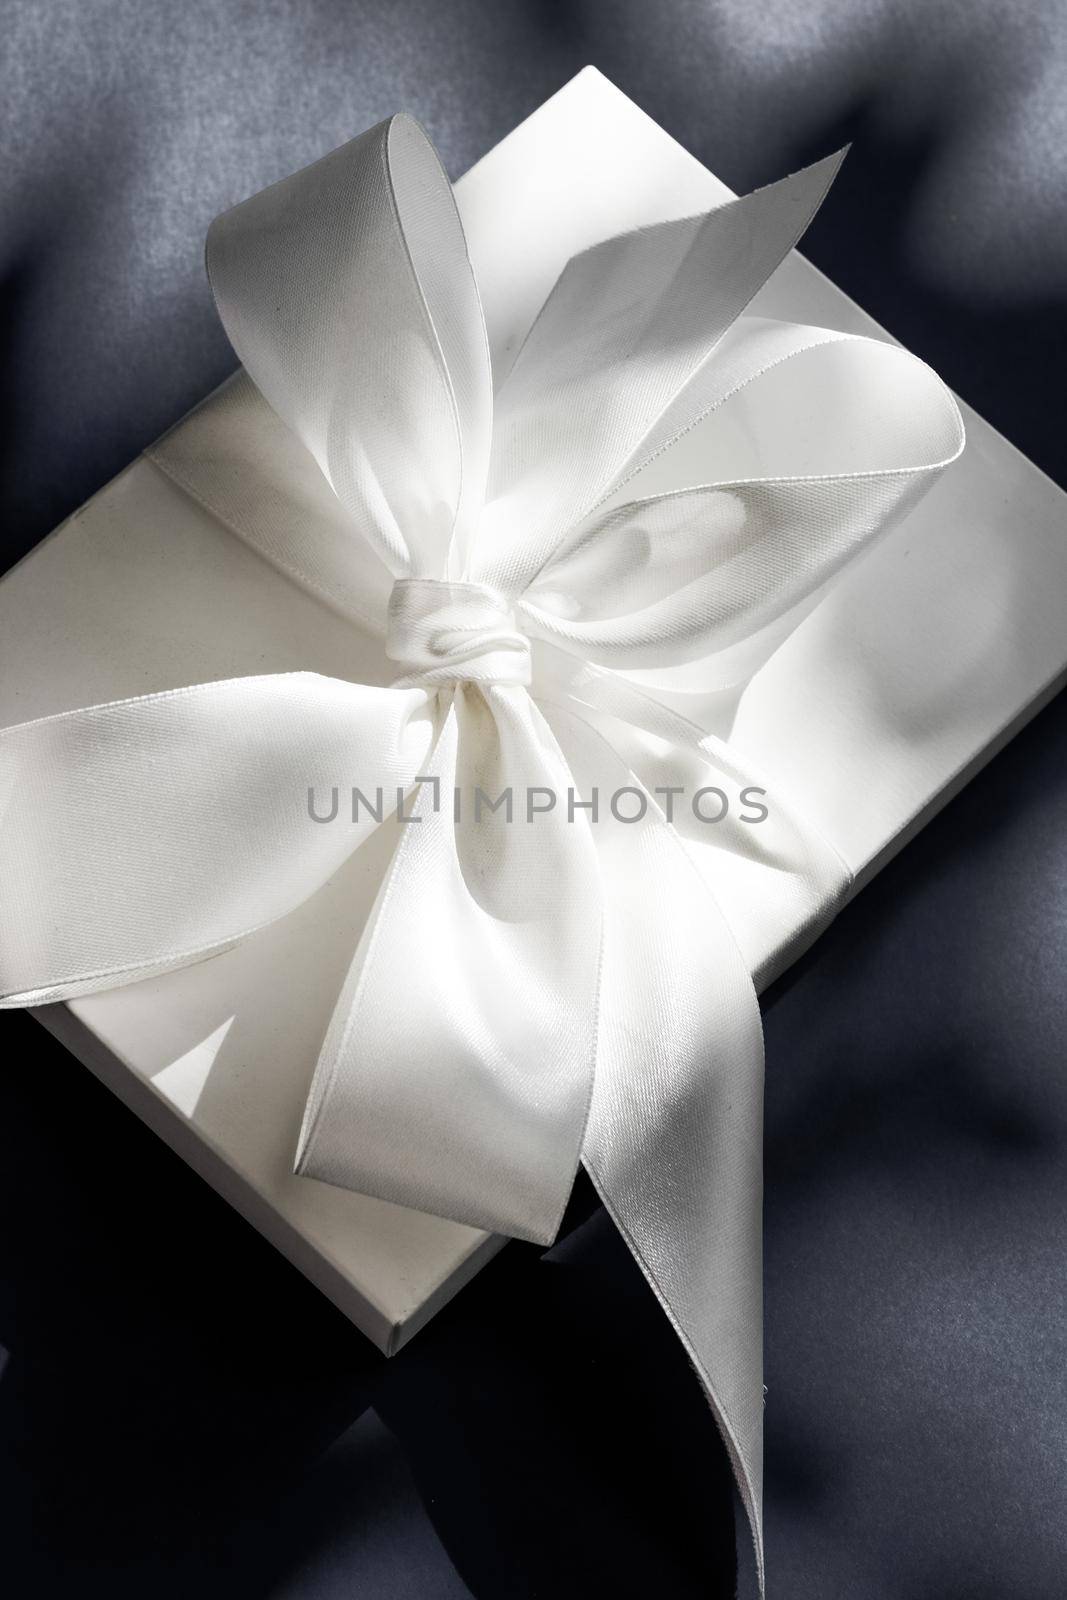 Anniversary celebration, shop sale promotion and luxe surprise concept - Luxury holiday white gift box with silk ribbon and bow on black background, luxe wedding or birthday present